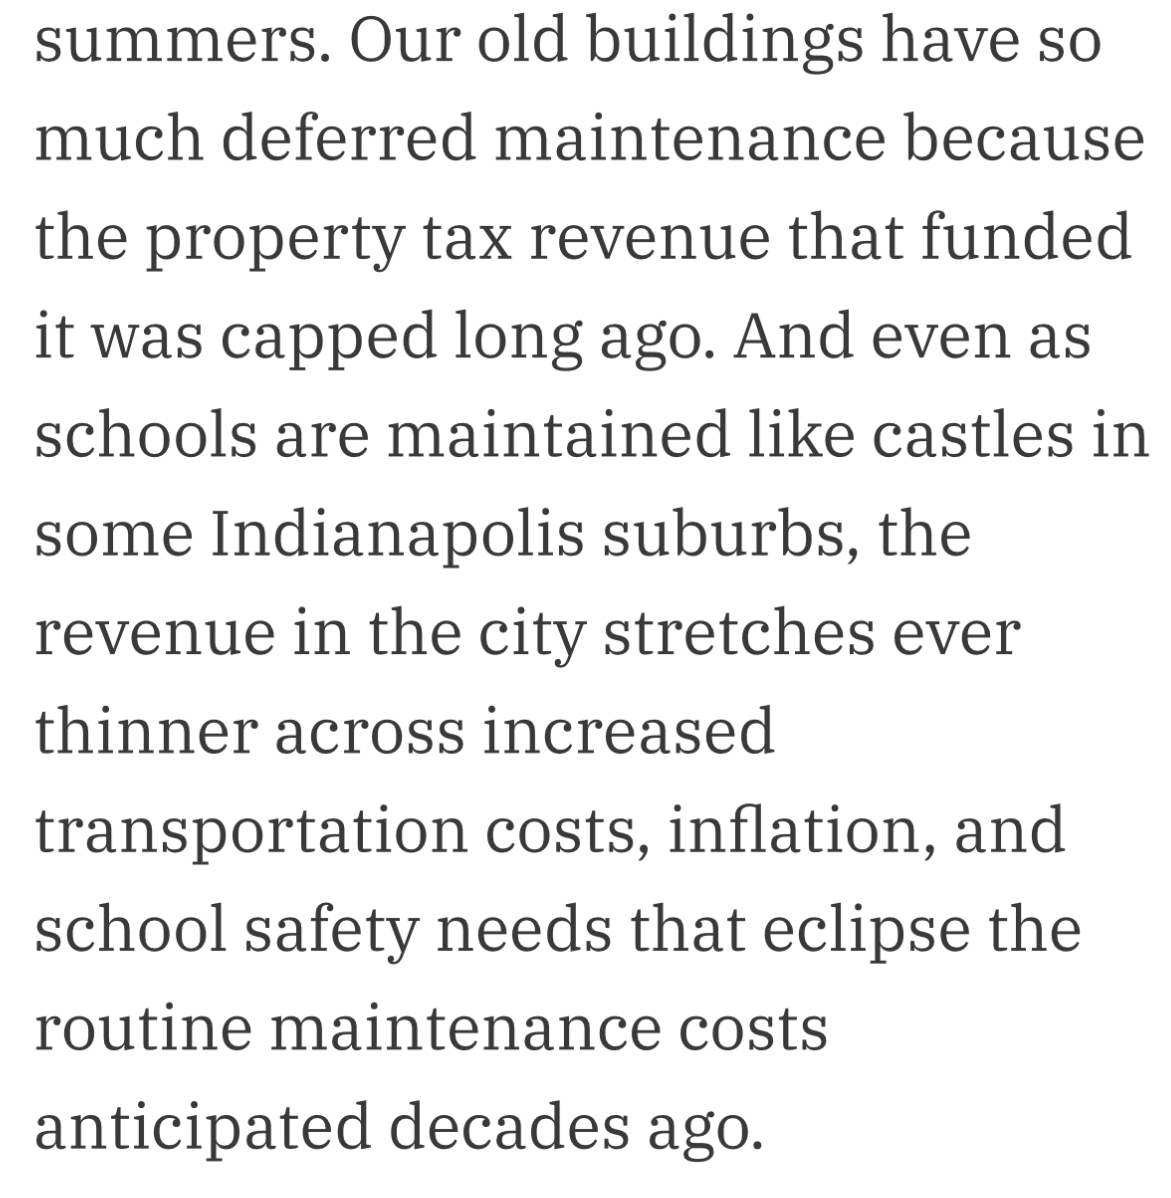 Saw this false claim in Chalkbeat today. IPS receives 137% more in property taxes today than it did a decade ago while its LEA serves 29% fewer students. During that time, cumulative inflation was 32%. IPS gets more per-pupil property taxes than any suburban district.